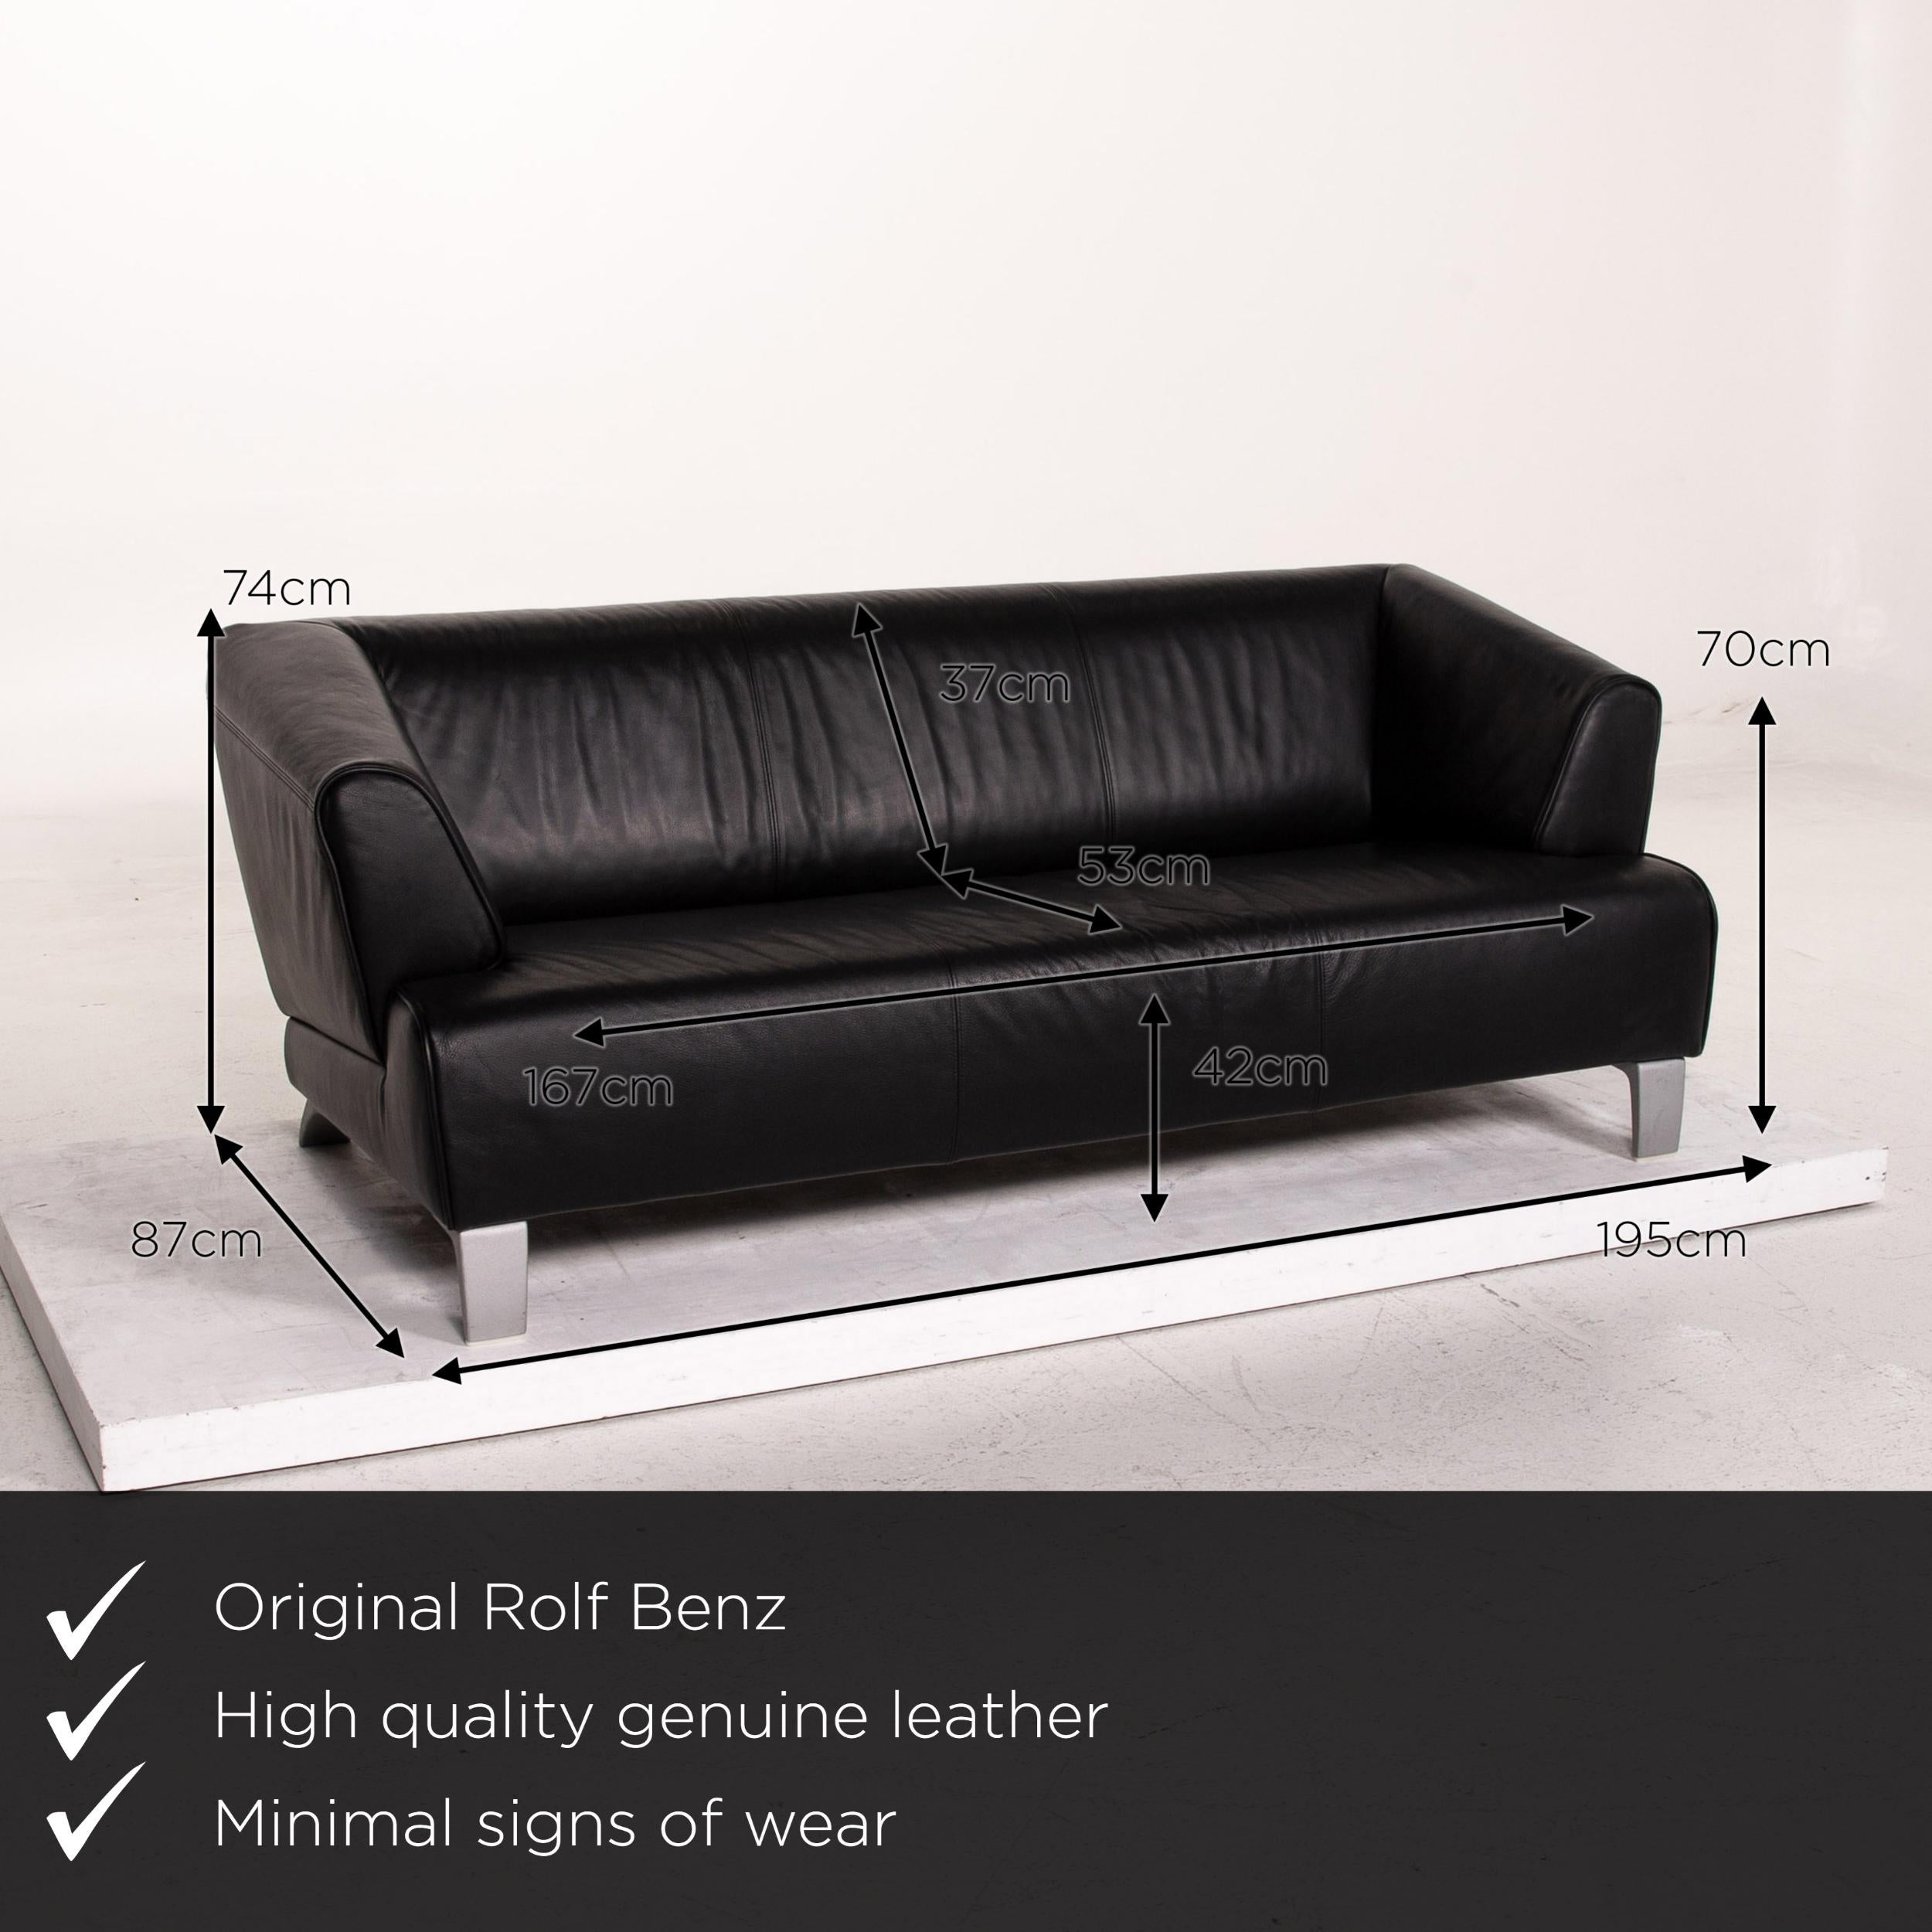 We present to you a Rolf Benz leather sofa black two-seat couch.

Product measurements in centimeters:

Depth 87
Width 195
Height 74
Seat height 42
Rest height 70
Seat depth 53
Seat width 167
Back height 37.
 
 
   